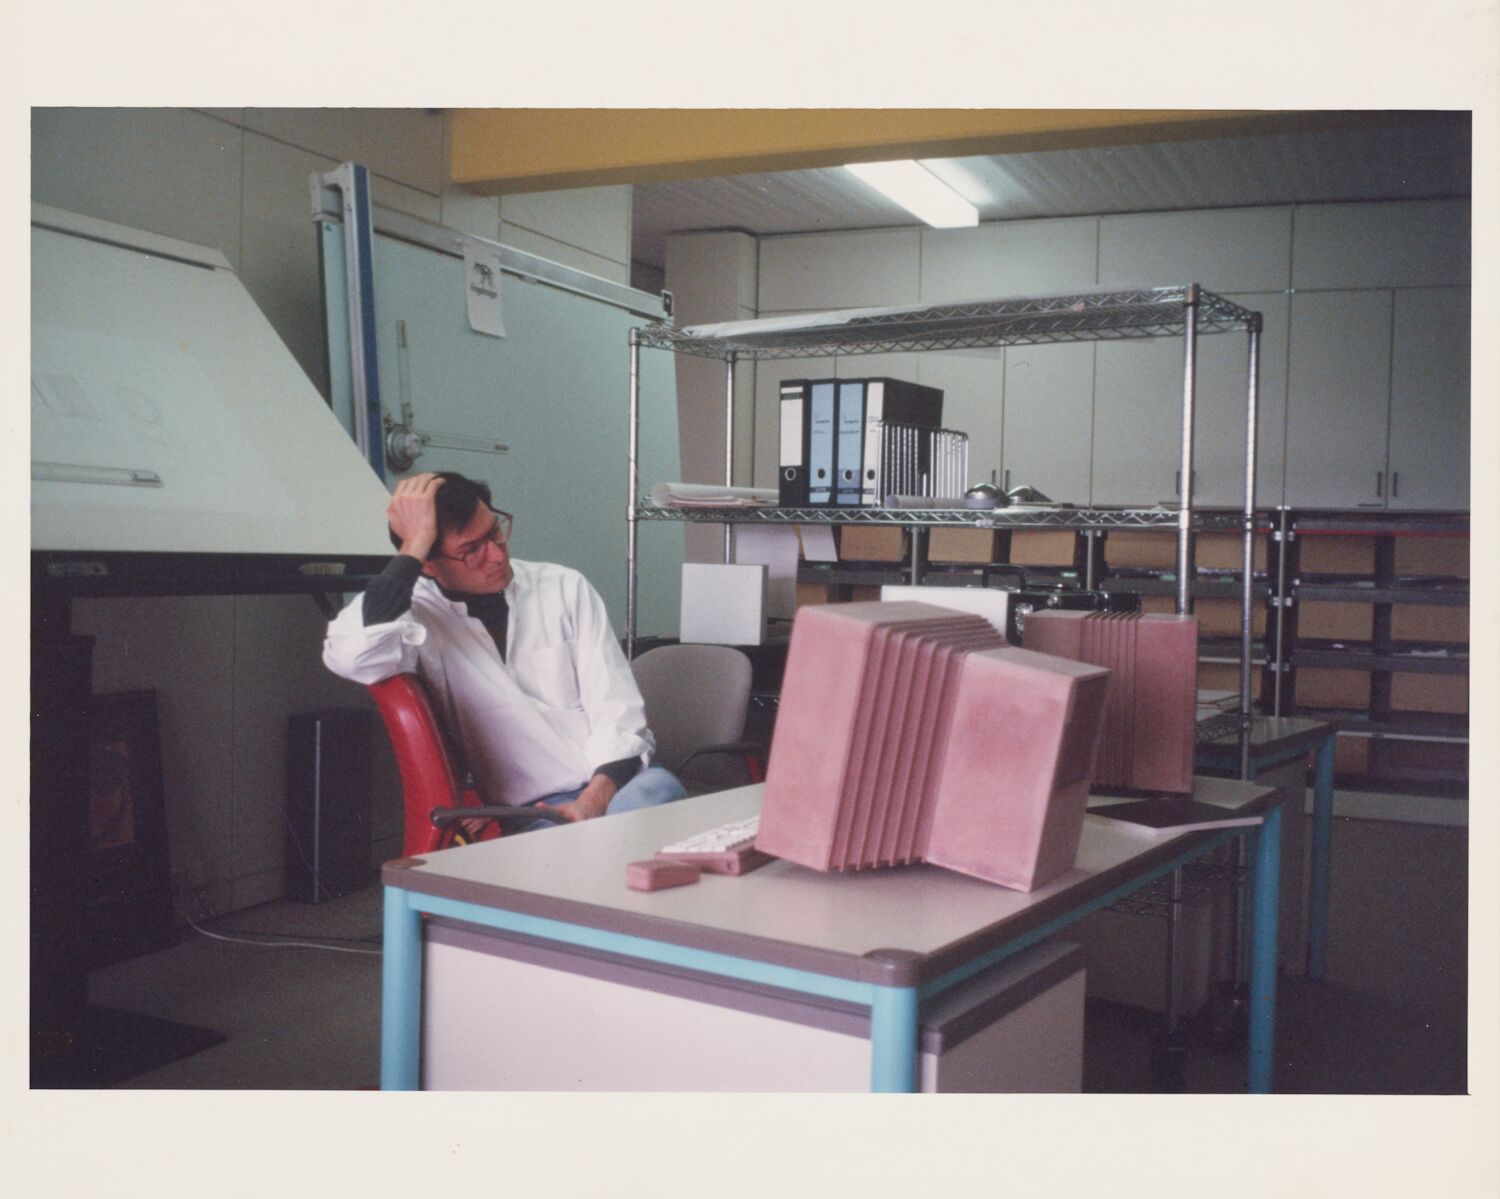 Steve sits in a chair, hand cradling his head, and stares at a life-size pink foam NeXT computer prototype.